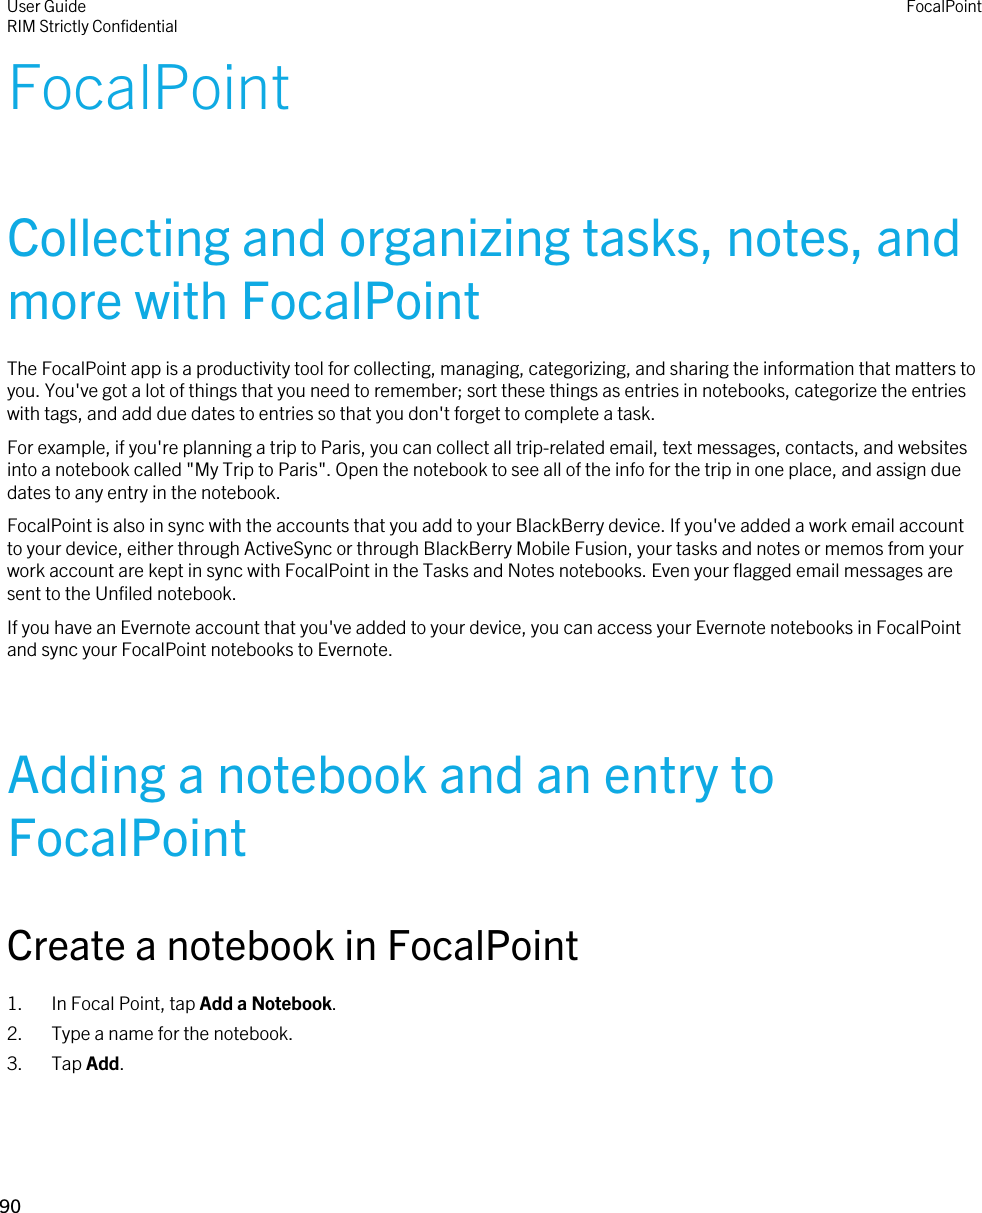 FocalPointCollecting and organizing tasks, notes, and more with FocalPointThe FocalPoint app is a productivity tool for collecting, managing, categorizing, and sharing the information that matters to you. You&apos;ve got a lot of things that you need to remember; sort these things as entries in notebooks, categorize the entries with tags, and add due dates to entries so that you don&apos;t forget to complete a task.For example, if you&apos;re planning a trip to Paris, you can collect all trip-related email, text messages, contacts, and websites into a notebook called &quot;My Trip to Paris&quot;. Open the notebook to see all of the info for the trip in one place, and assign due dates to any entry in the notebook.FocalPoint is also in sync with the accounts that you add to your BlackBerry device. If you&apos;ve added a work email account to your device, either through ActiveSync or through BlackBerry Mobile Fusion, your tasks and notes or memos from your work account are kept in sync with FocalPoint in the Tasks and Notes notebooks. Even your flagged email messages are sent to the Unfiled notebook.If you have an Evernote account that you&apos;ve added to your device, you can access your Evernote notebooks in FocalPoint and sync your FocalPoint notebooks to Evernote.Adding a notebook and an entry to FocalPointCreate a notebook in FocalPoint1. In Focal Point, tap Add a Notebook.2. Type a name for the notebook.3. Tap Add.User GuideRIM Strictly Confidential FocalPoint90 